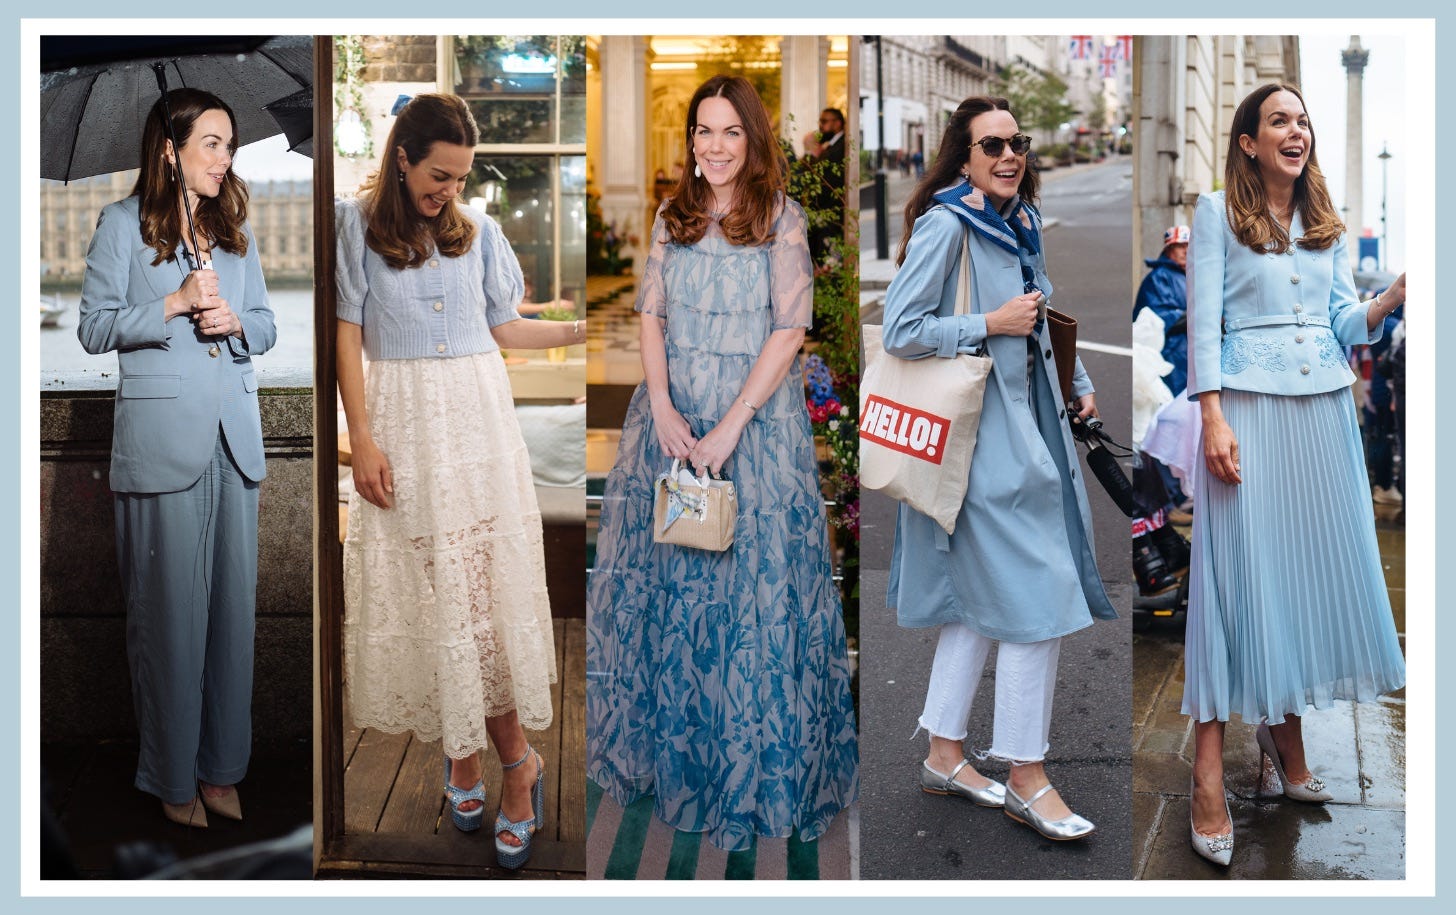 5 Easy Ways to Dress More Feminine - Lizzie in Lace